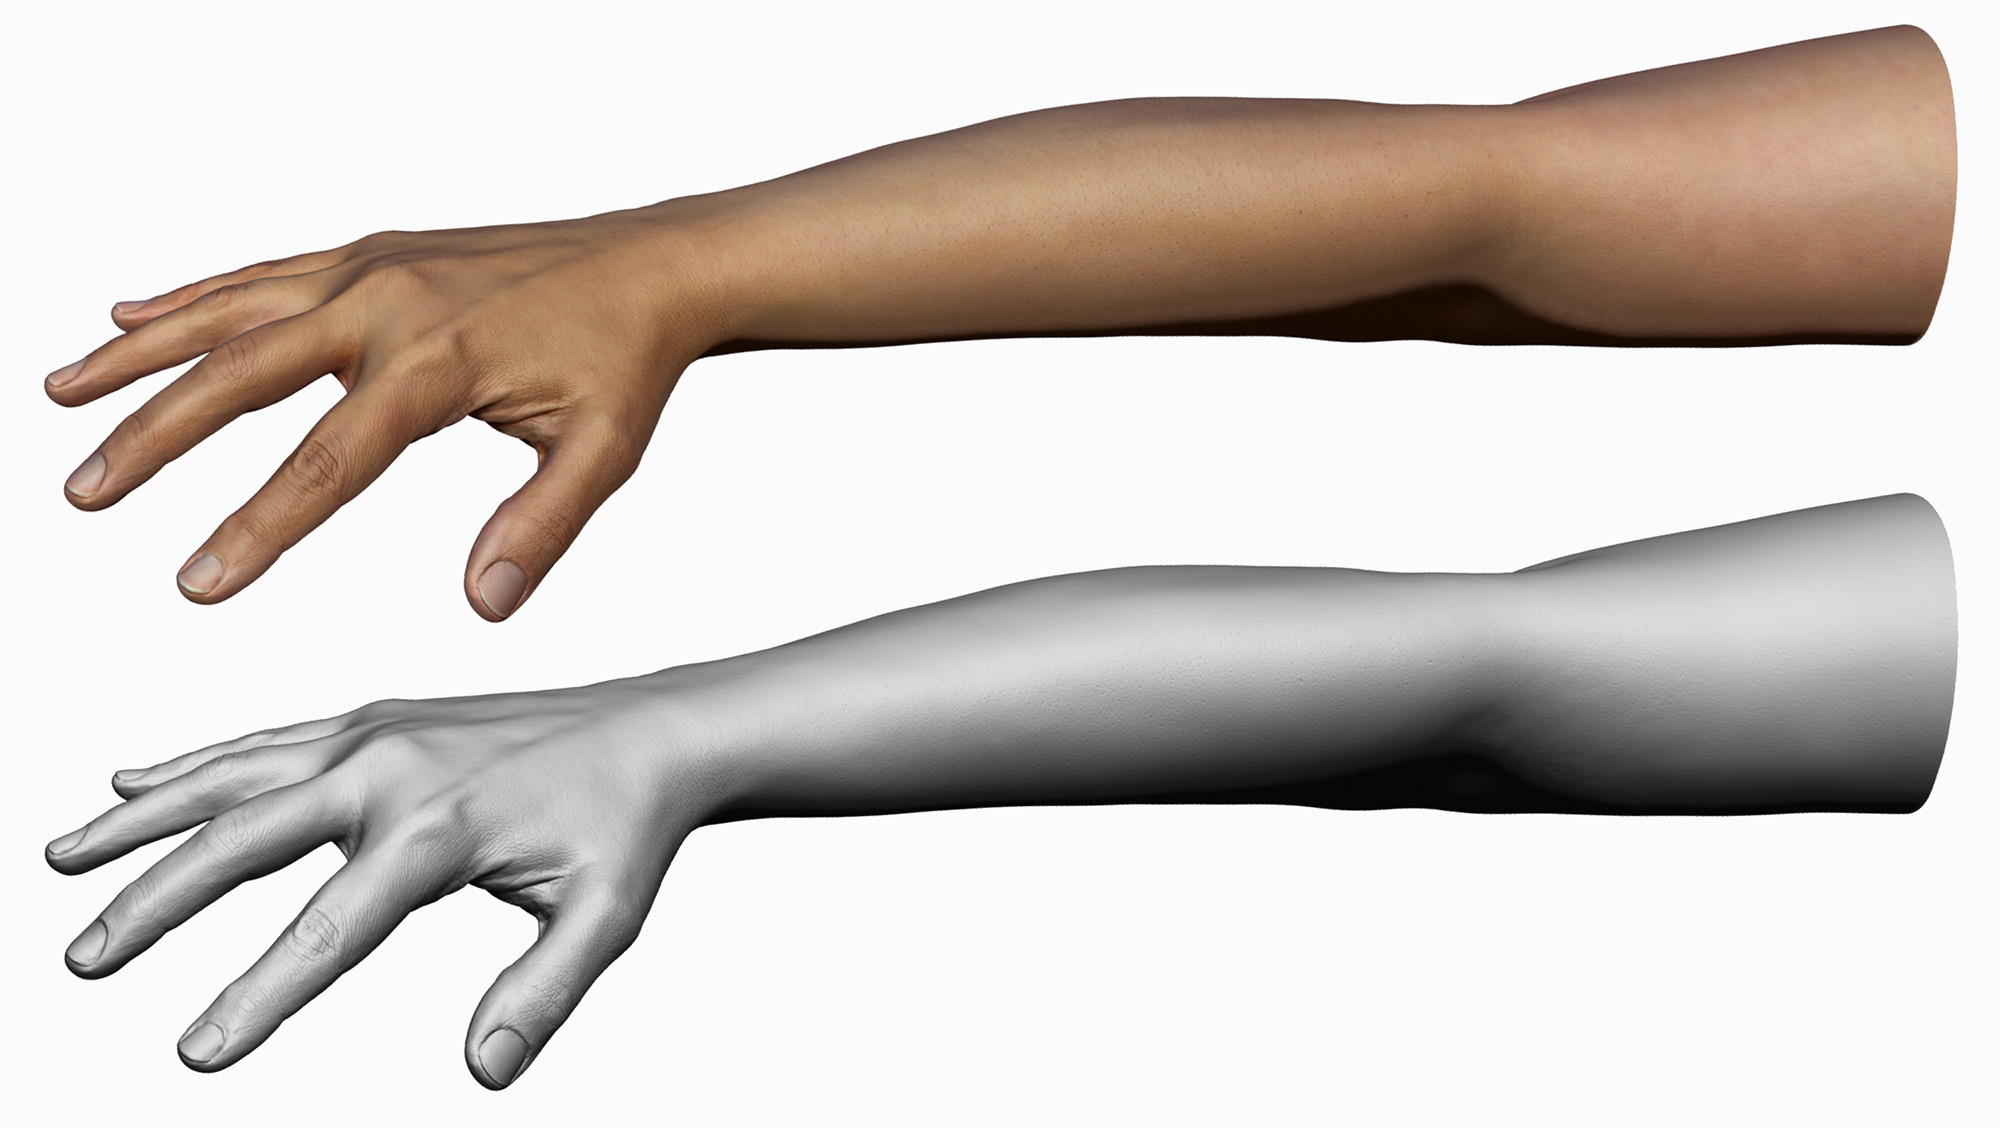 Forty Year old asian female scanned from bicep to fingertip model in 3d